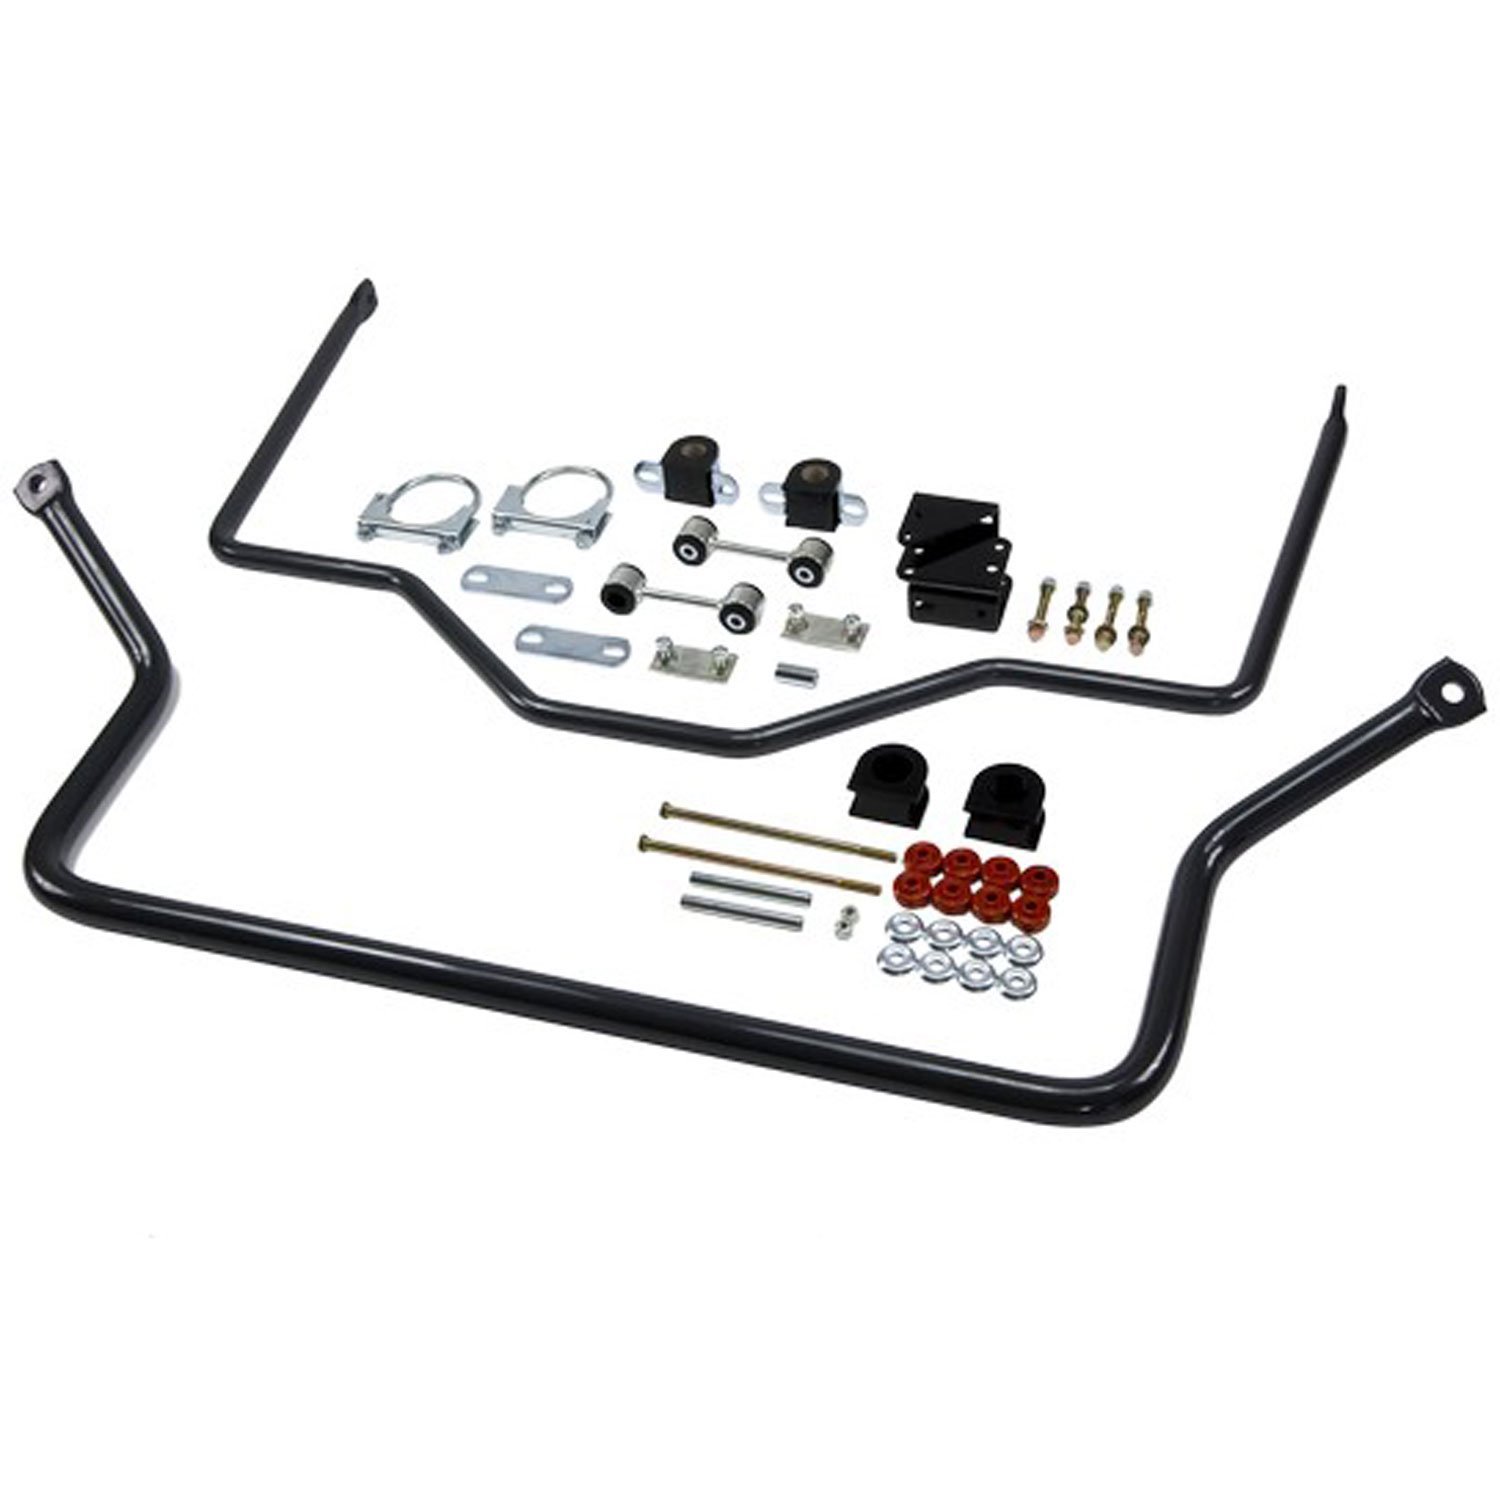 Front/Rear Sway Bar Kit for 1999-2006 C1500 Pick-Up Trucks